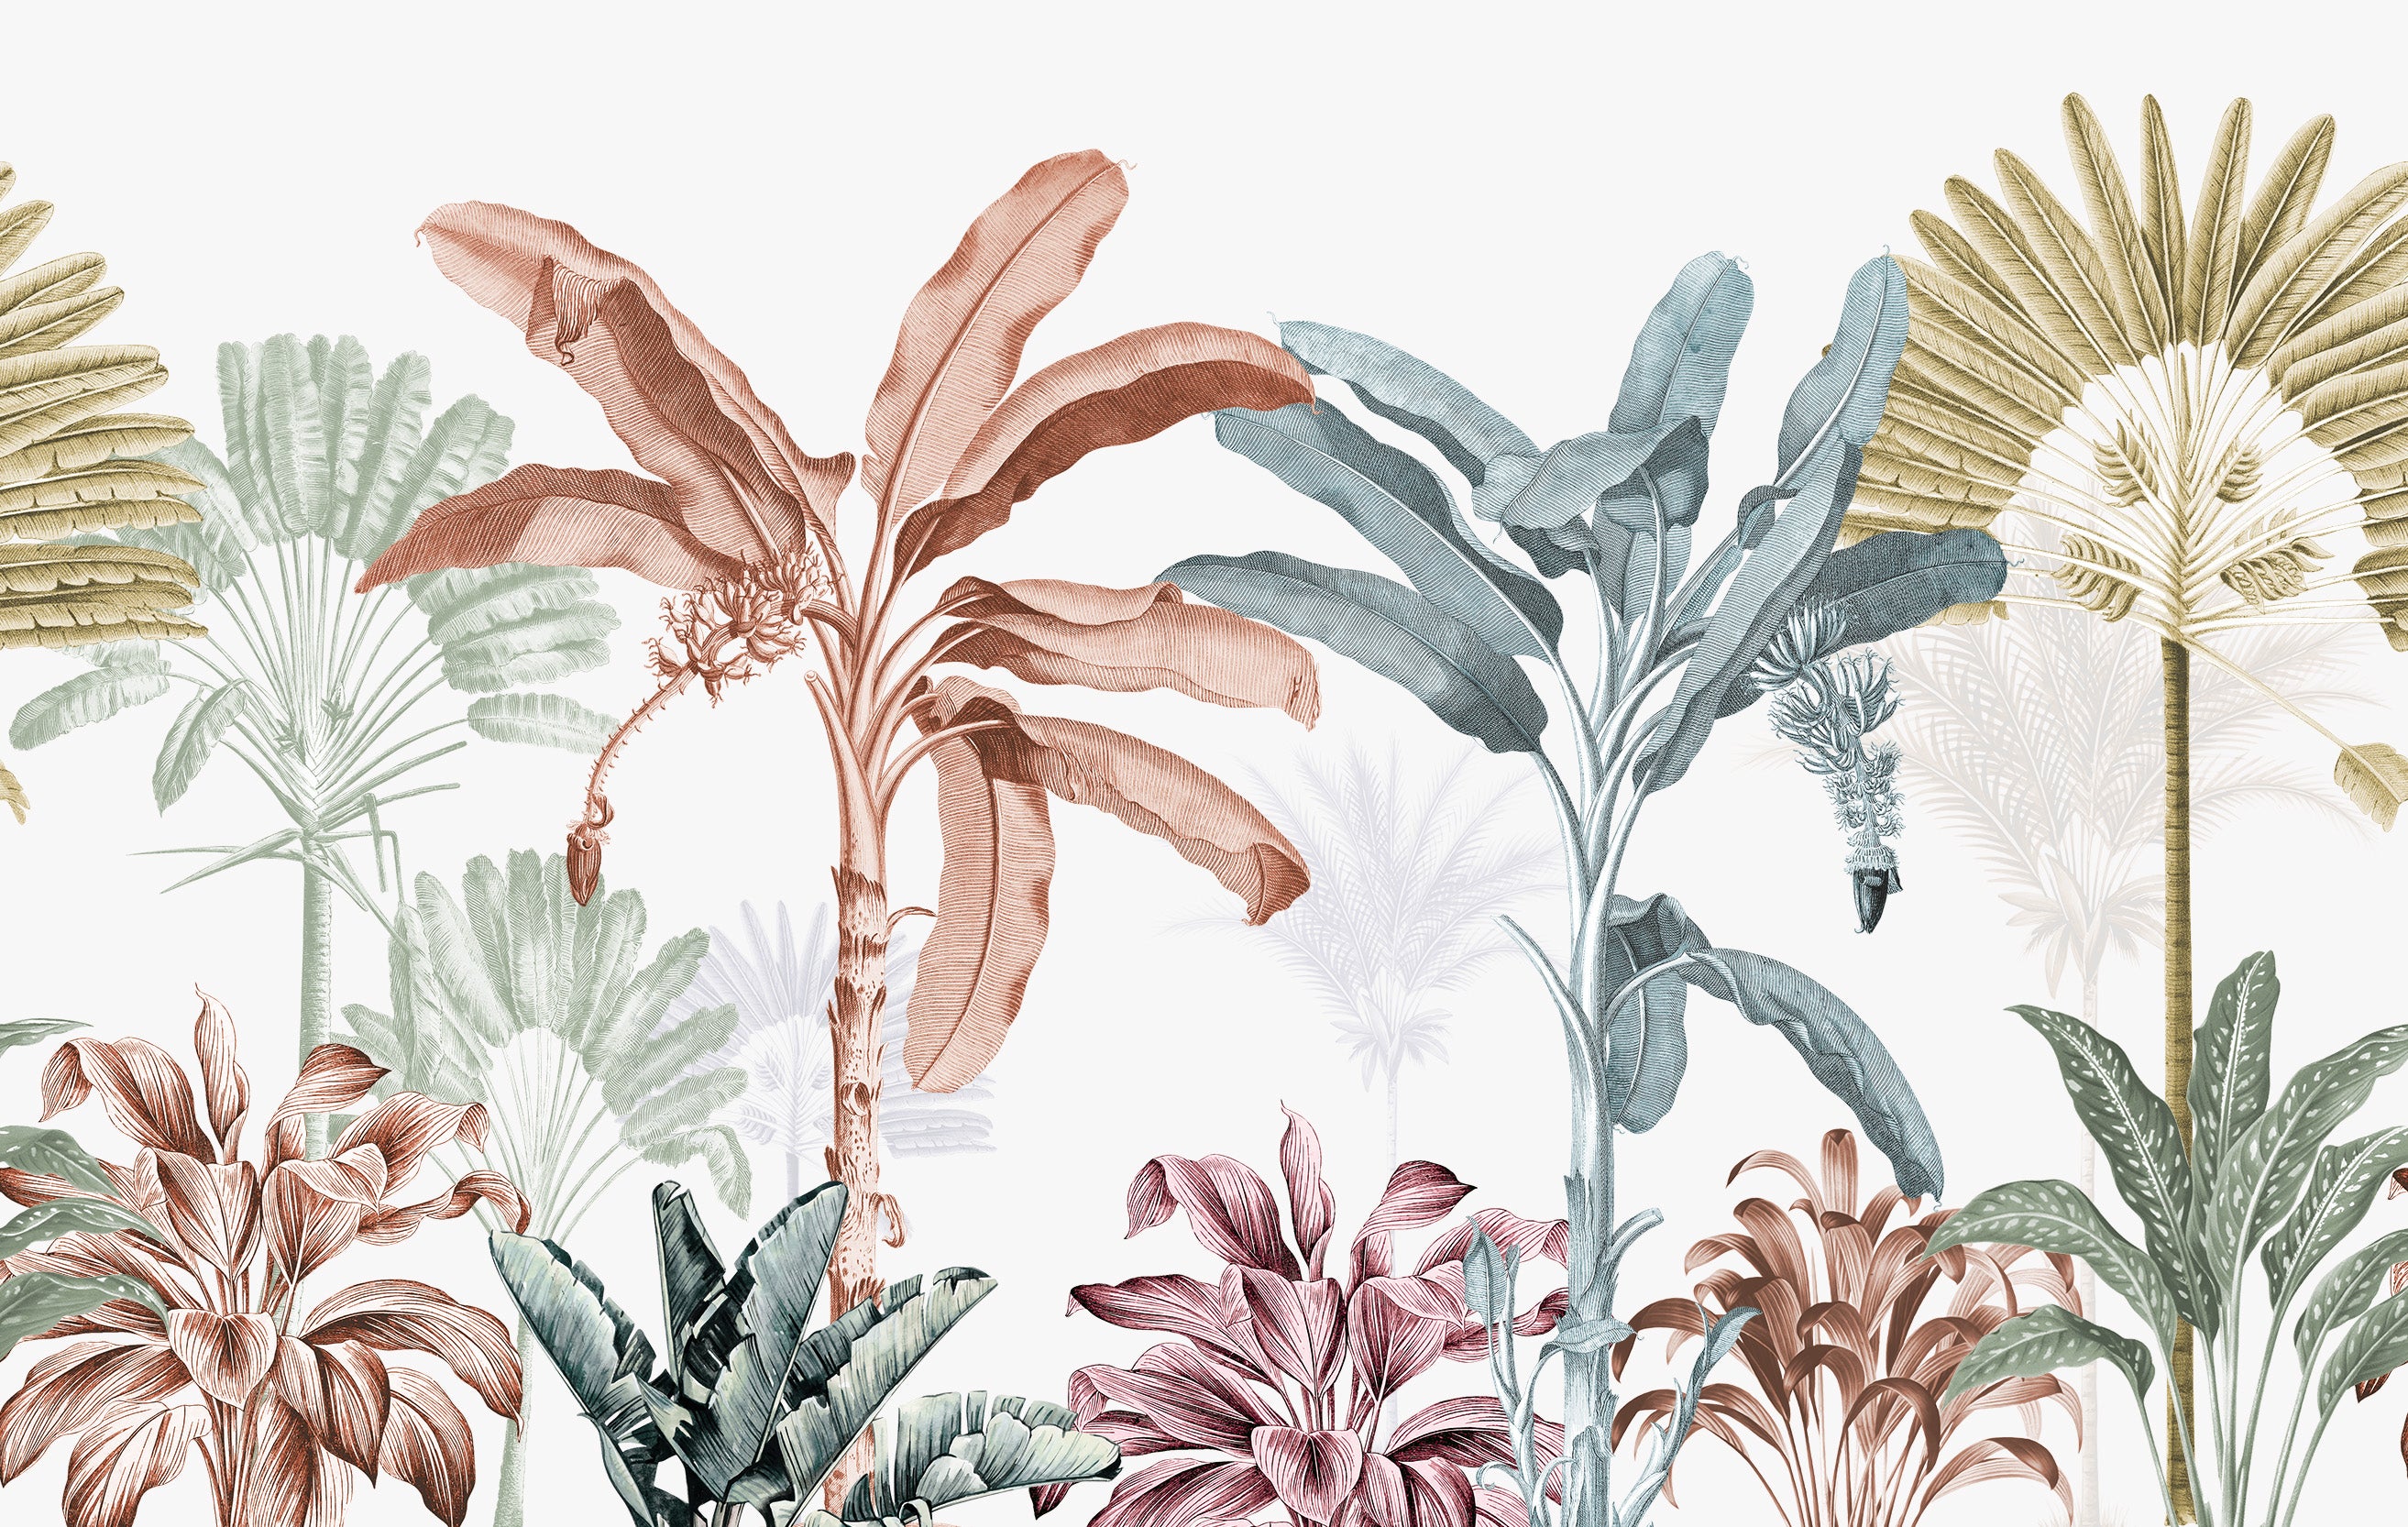 colourful marron and teal vintage tropical wallpaper mural